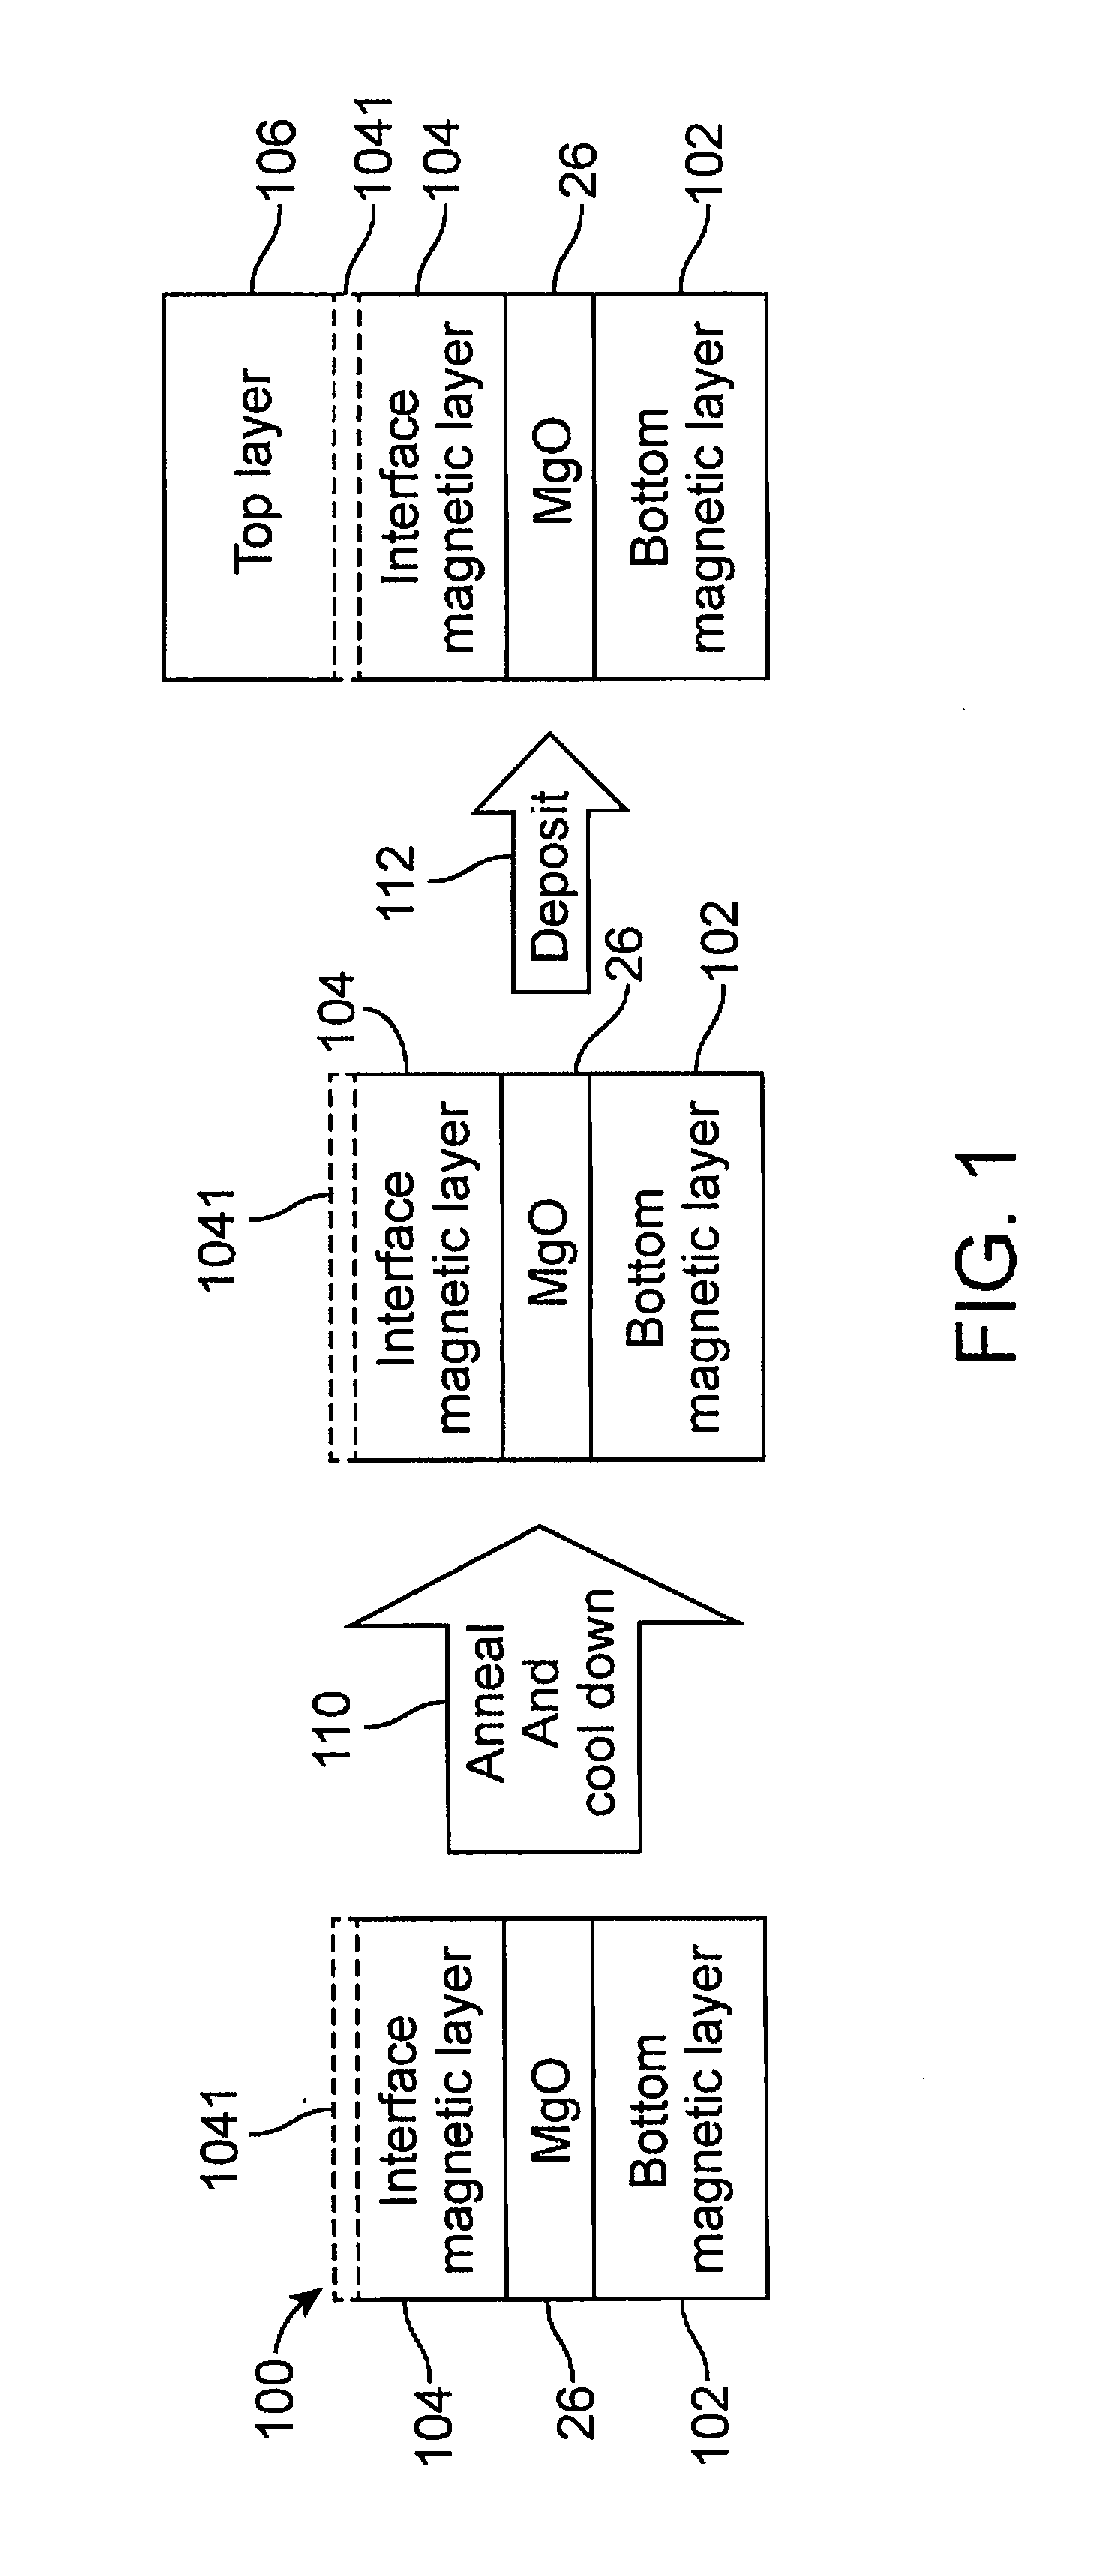 Memory system having thermally stable perpendicular magneto tunnel junction (MTJ) and a method of manufacturing same